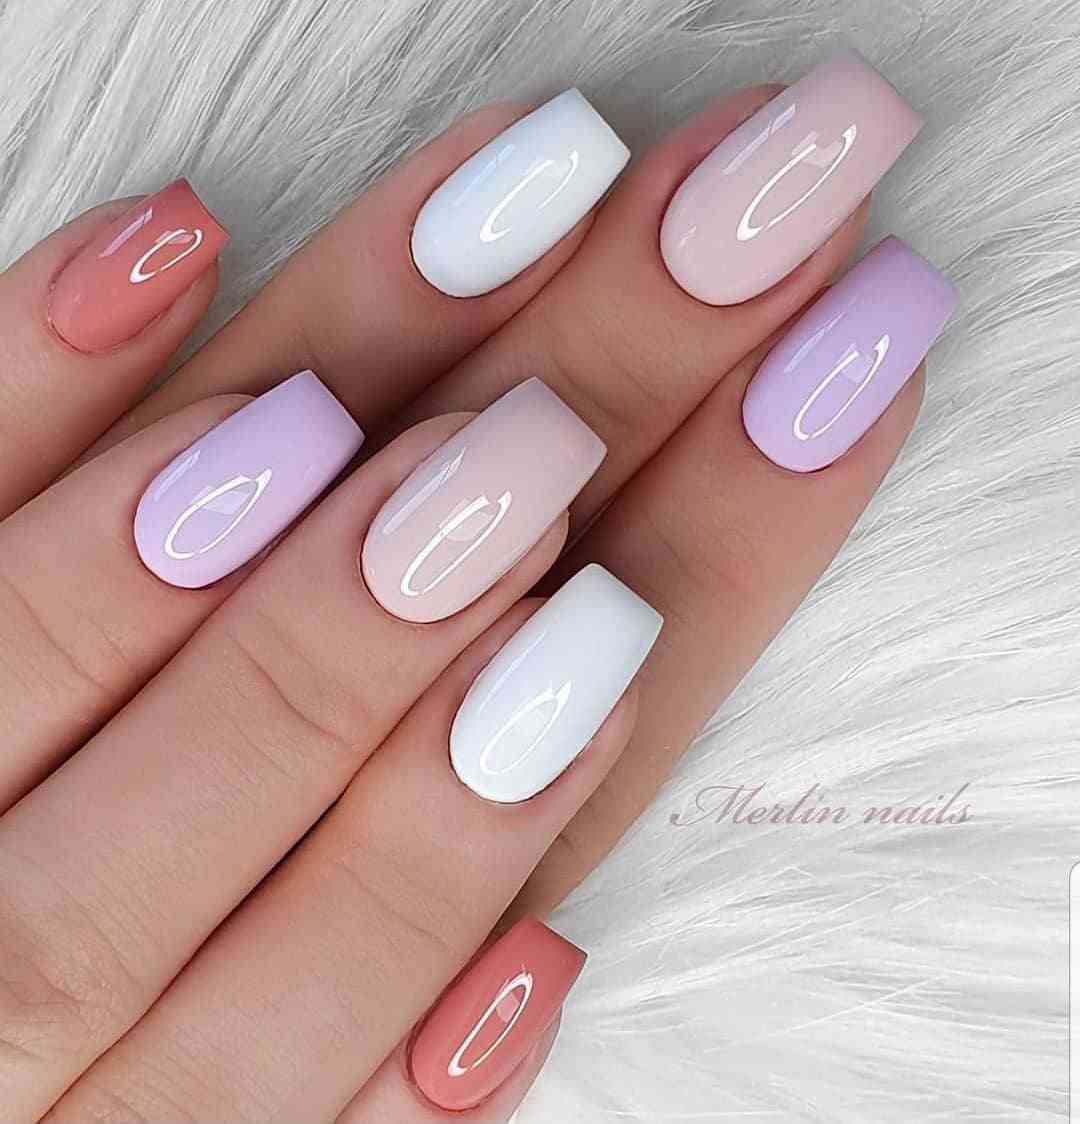 The 100+ Best Nail Designs Trends And Ideas In 2021 images 43